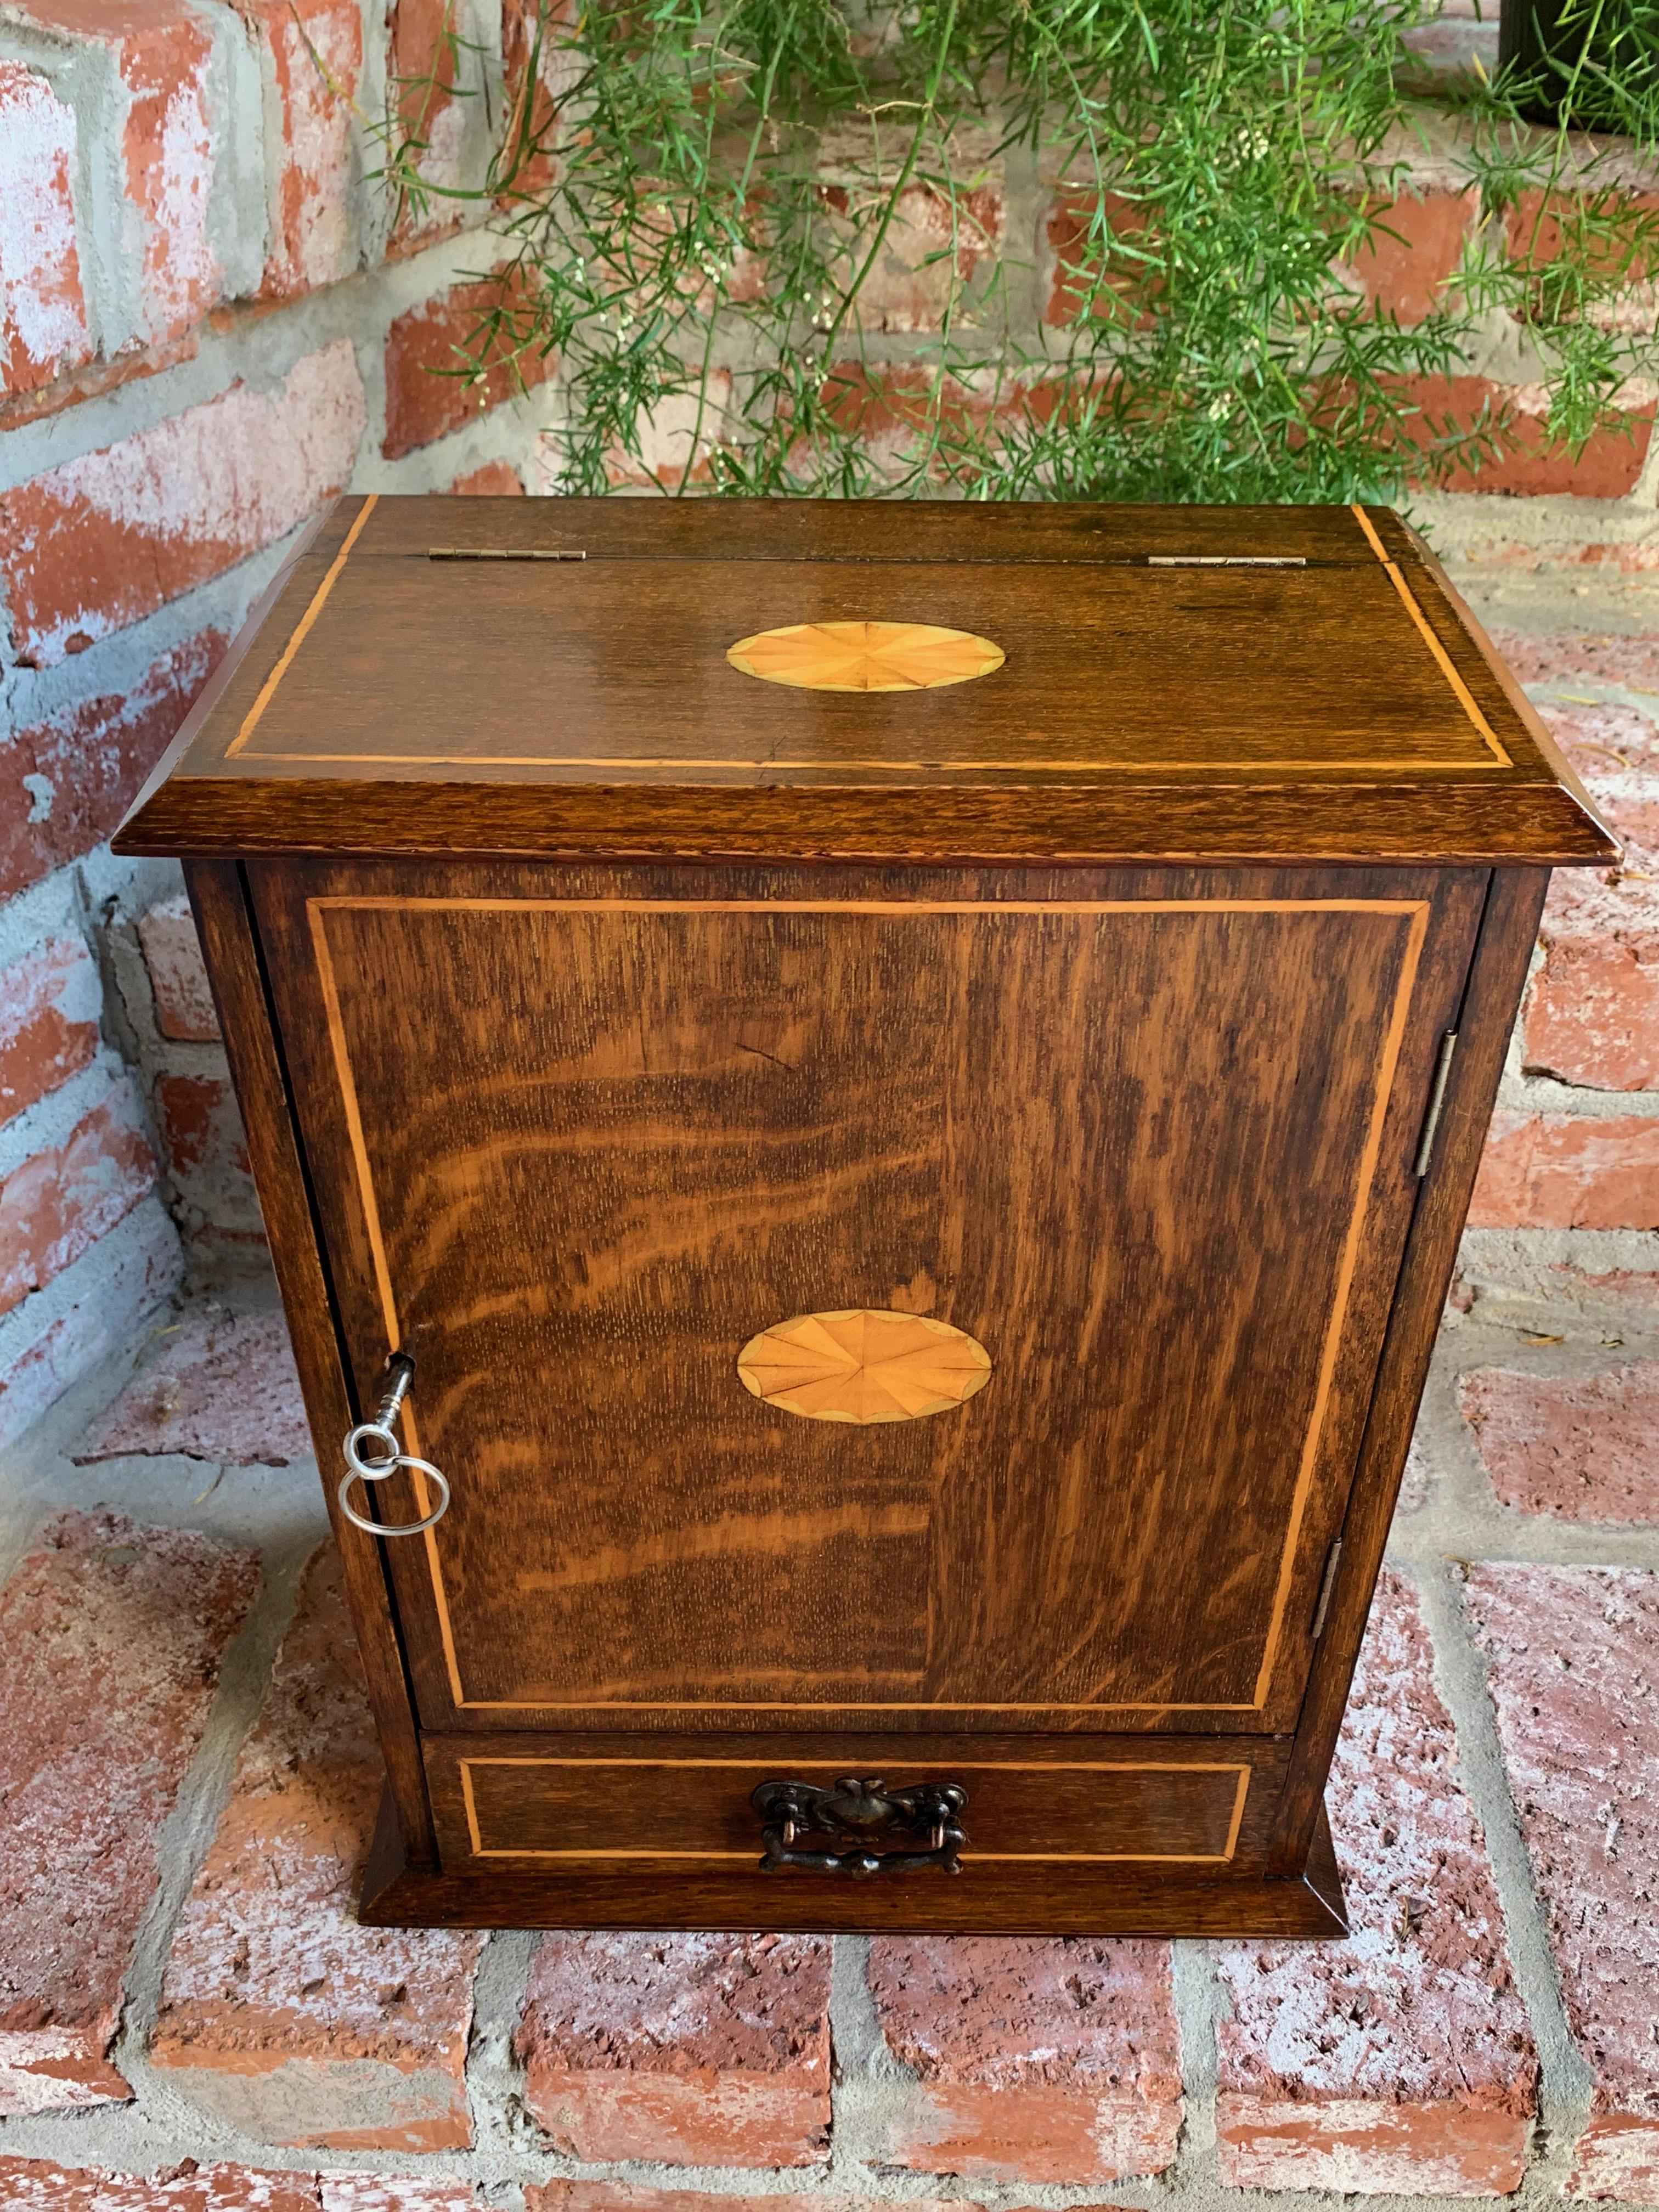 Direct from England, from our most recent buying trip, we have an Entire collection of antique English “gentleman’s cabinets”! Many have dated, engraved presentation plaques, and all of them are fabulous!
~Typically these boxes were used for